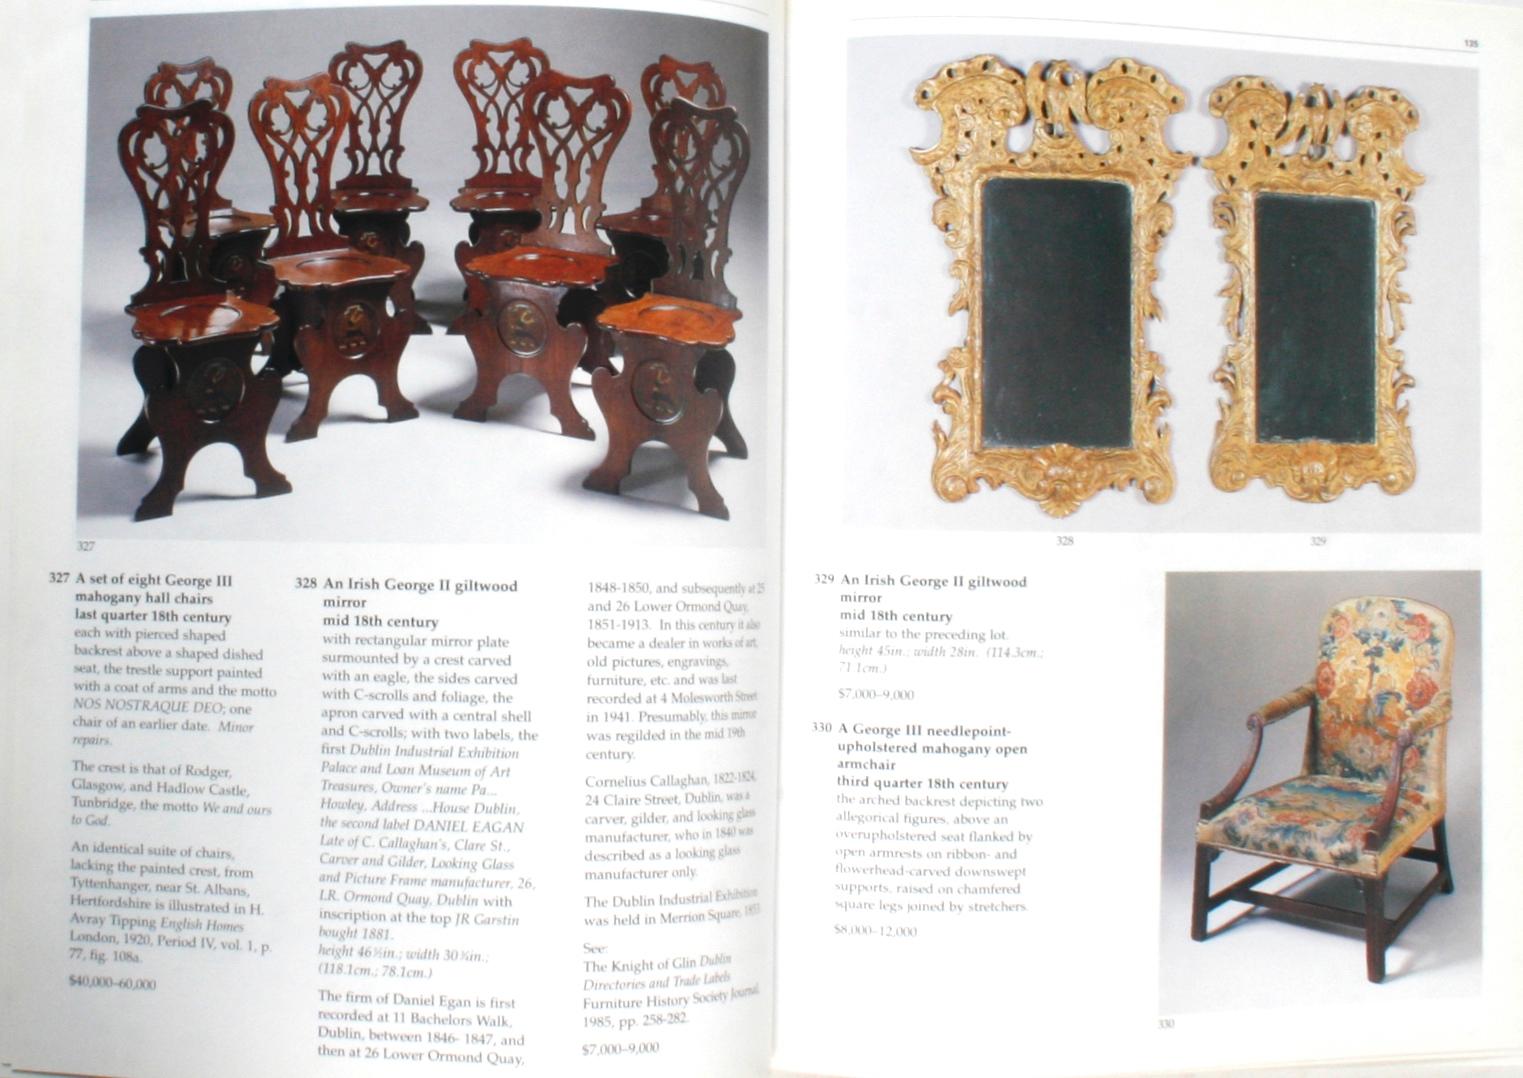 Sotheby's; Important English Furniture, European Ceramics and Decorations For Sale 7